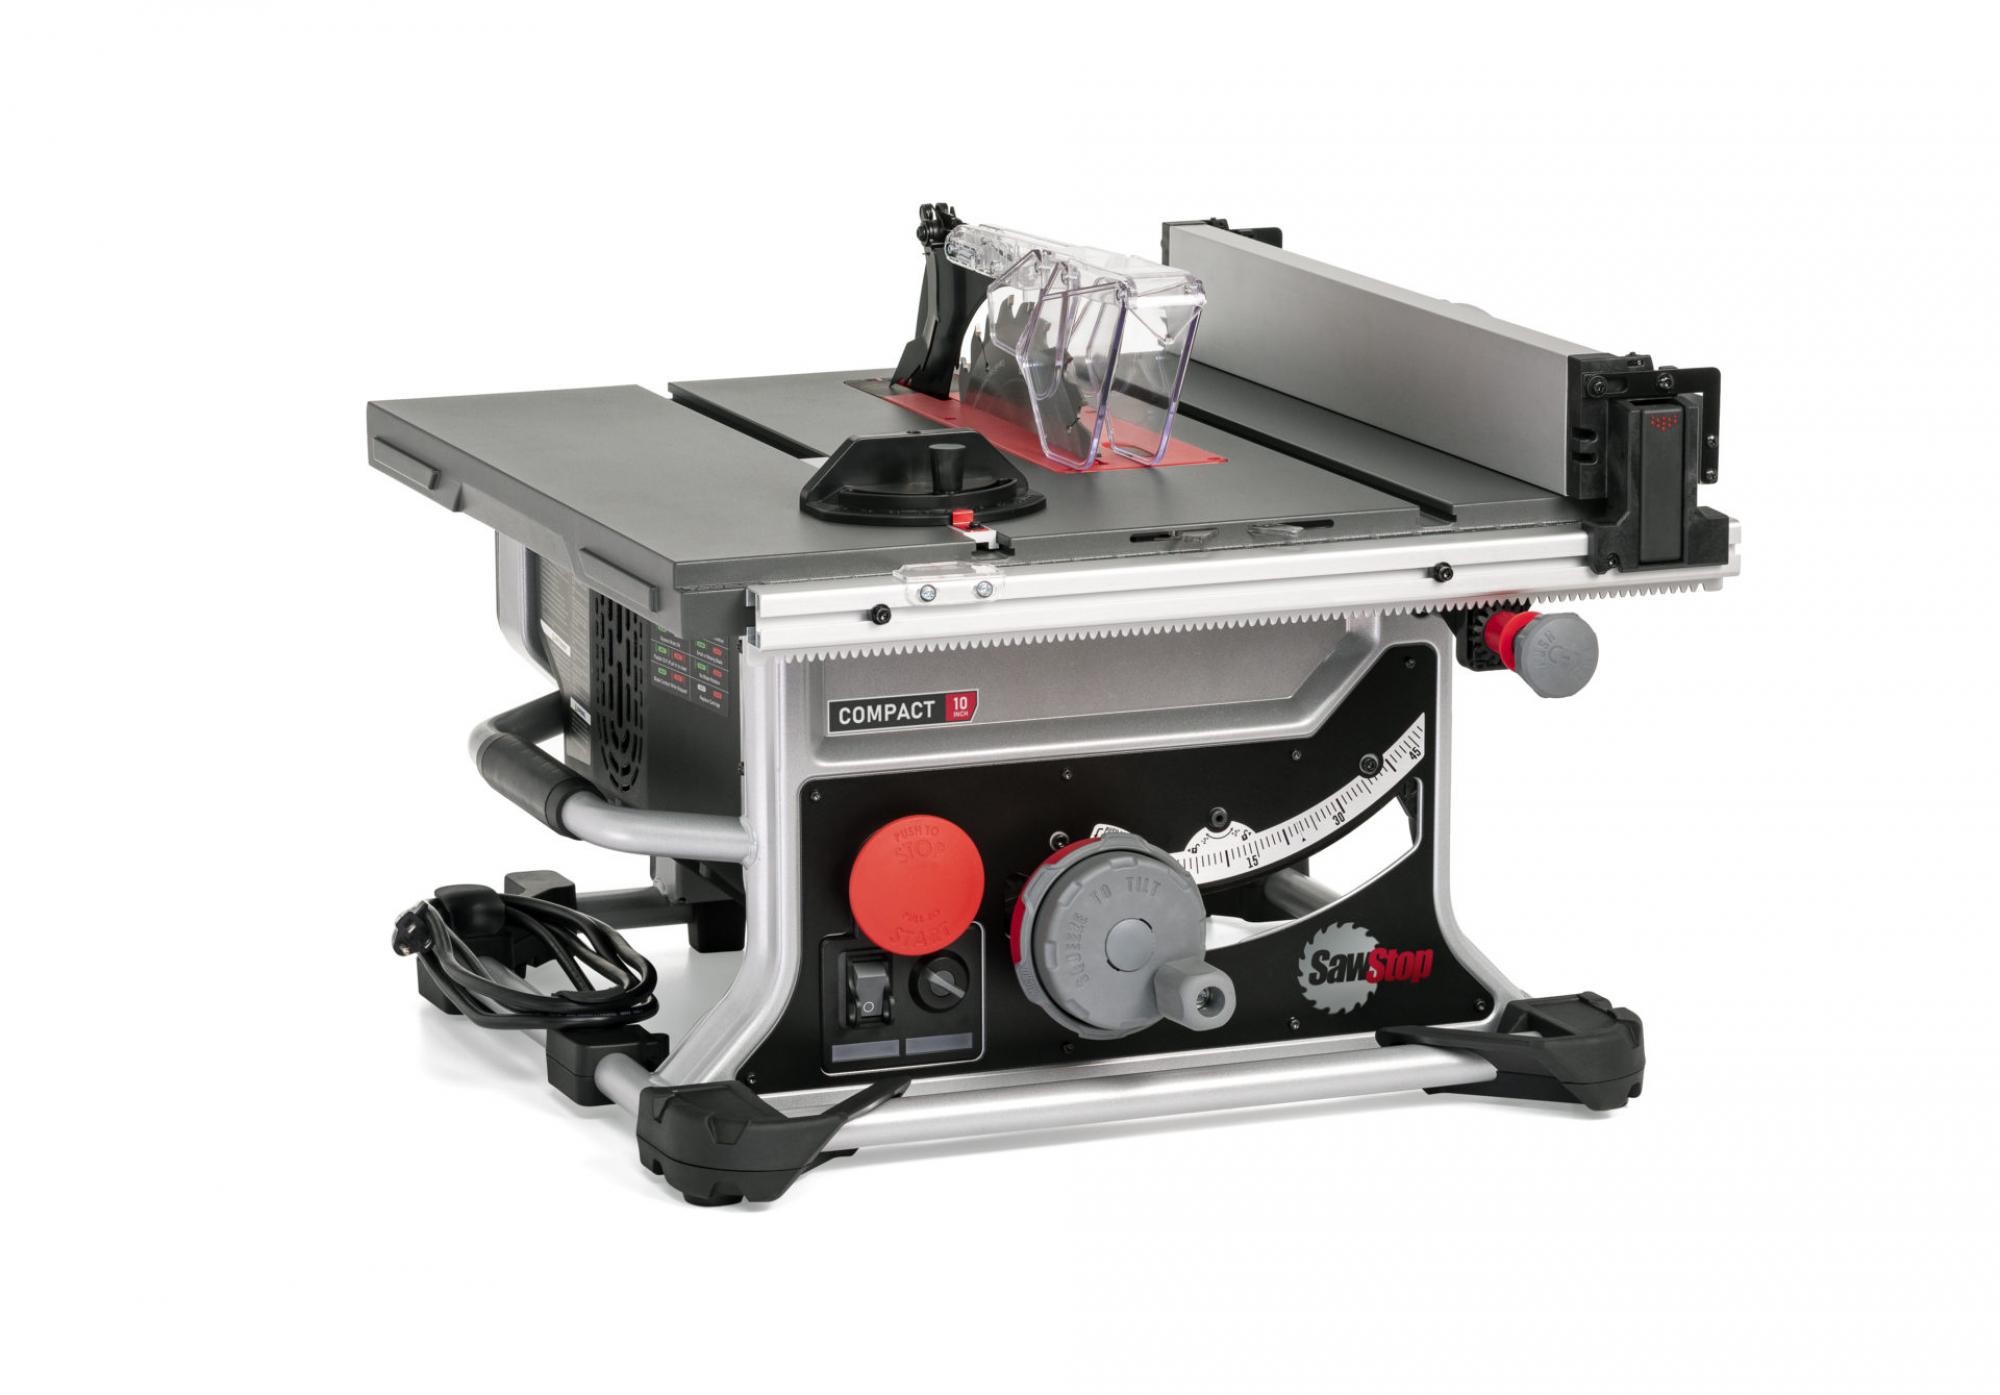 where are sawstop table saws made?